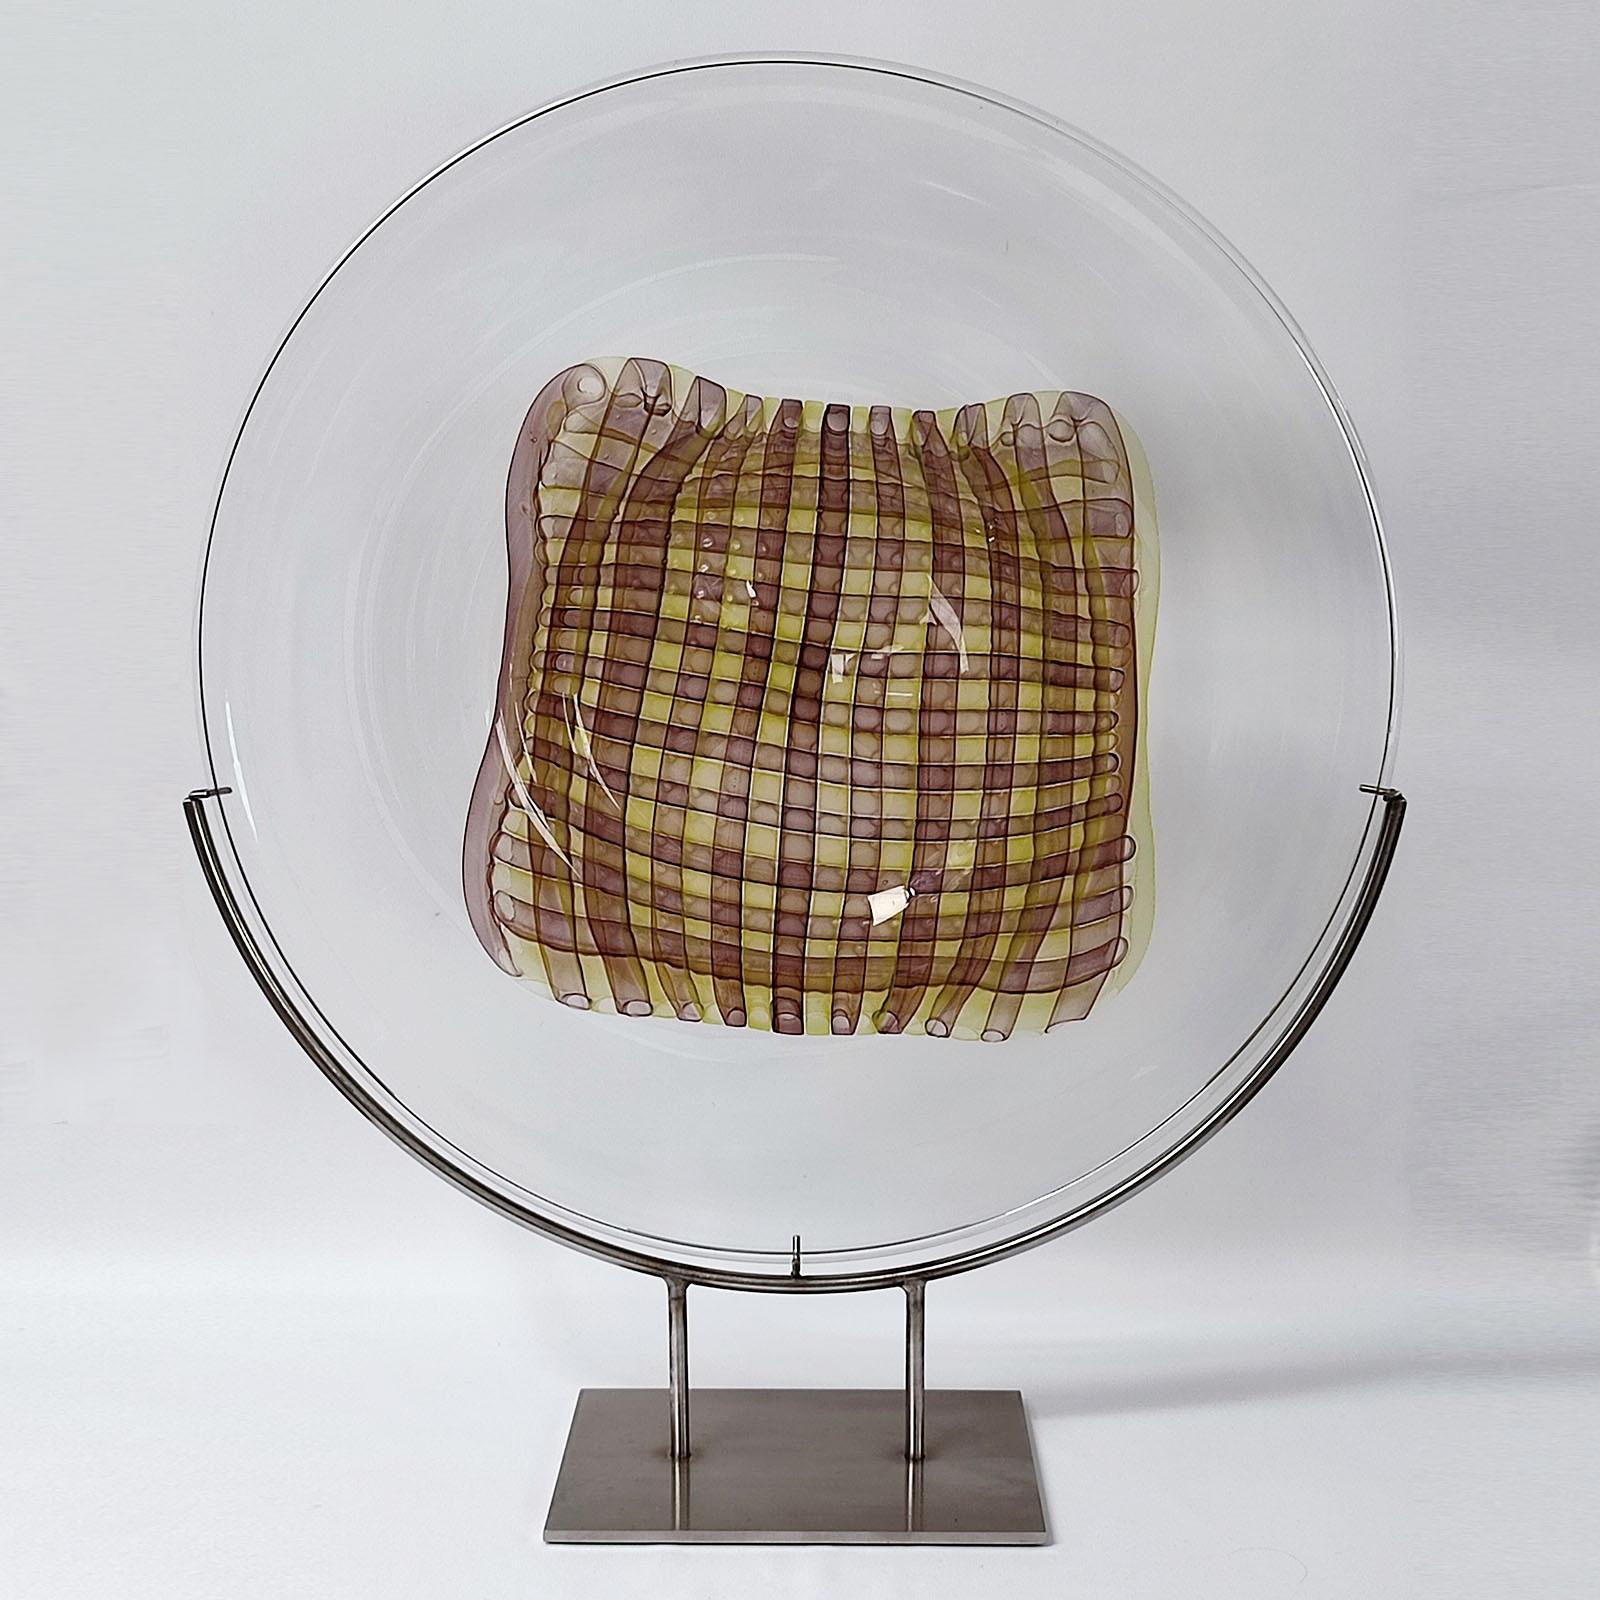 Modern Gary Beecham Large Decorative Glass Plate 'Textile Vessel', 1982 For Sale